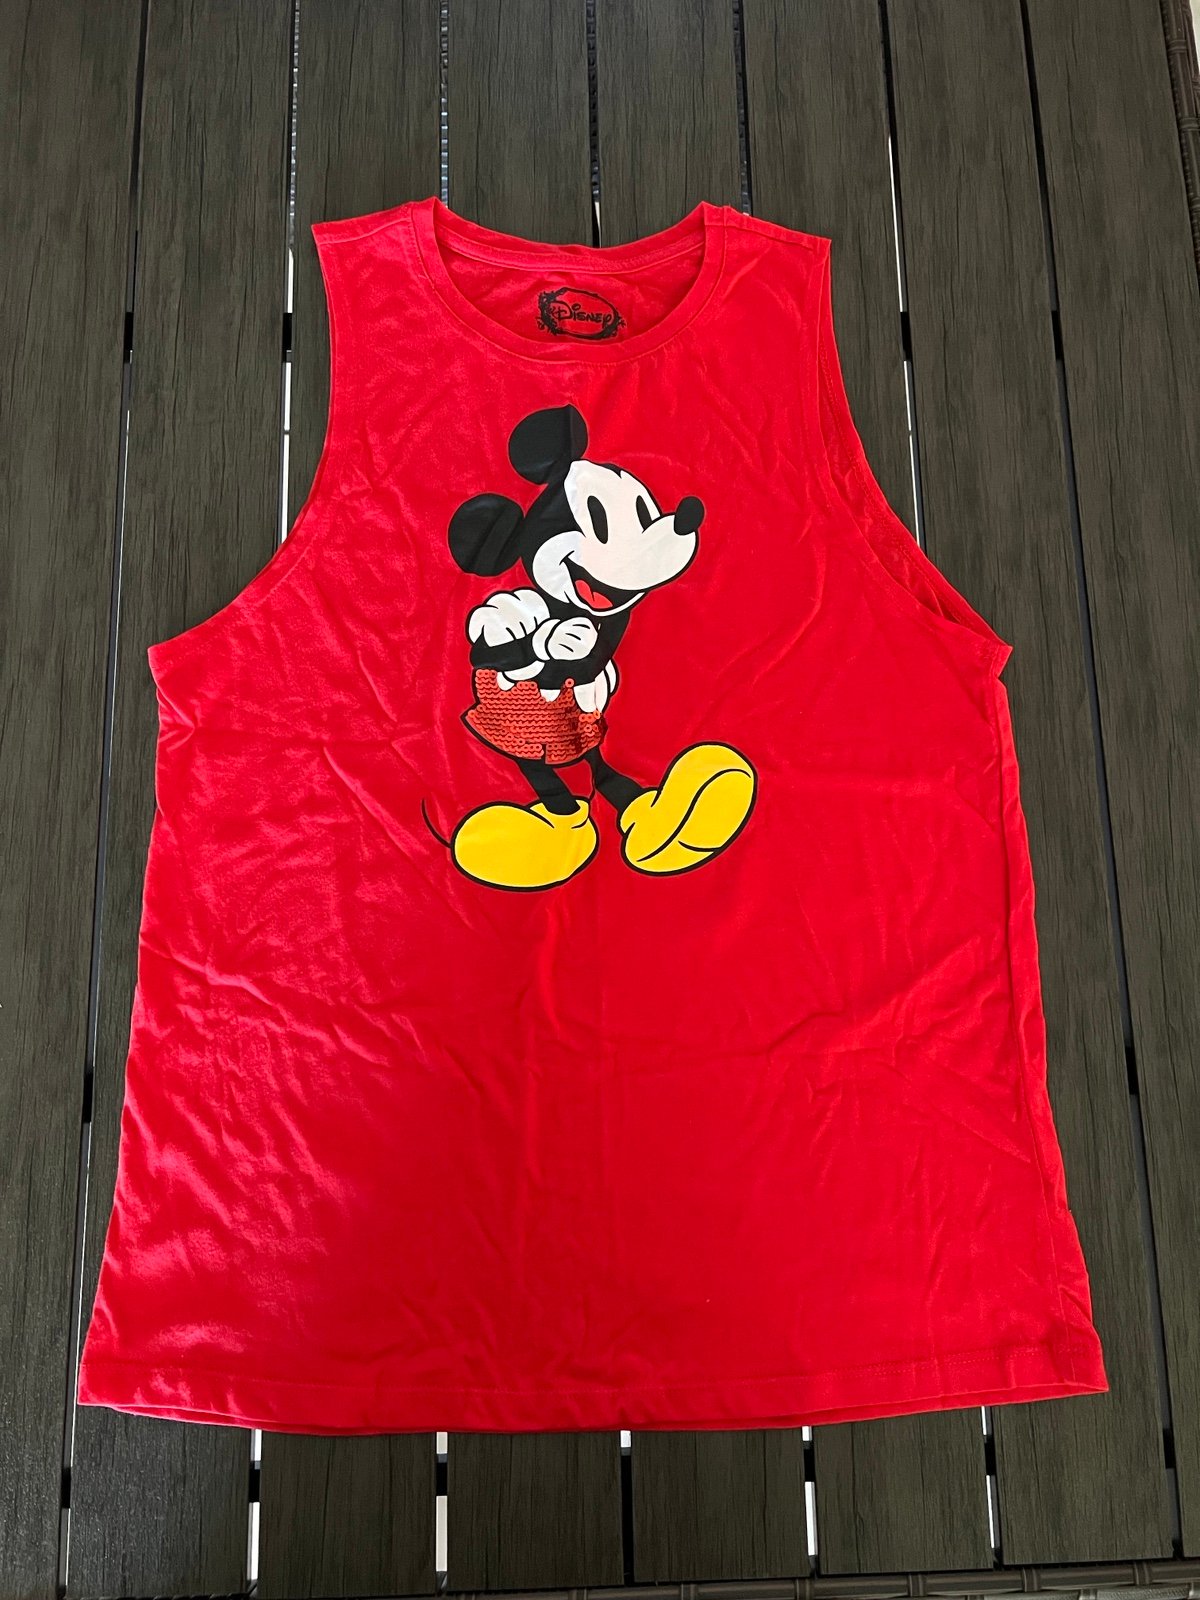 Affordable Disney Mickey Mouse Tank Top lwzfrMFTX just 